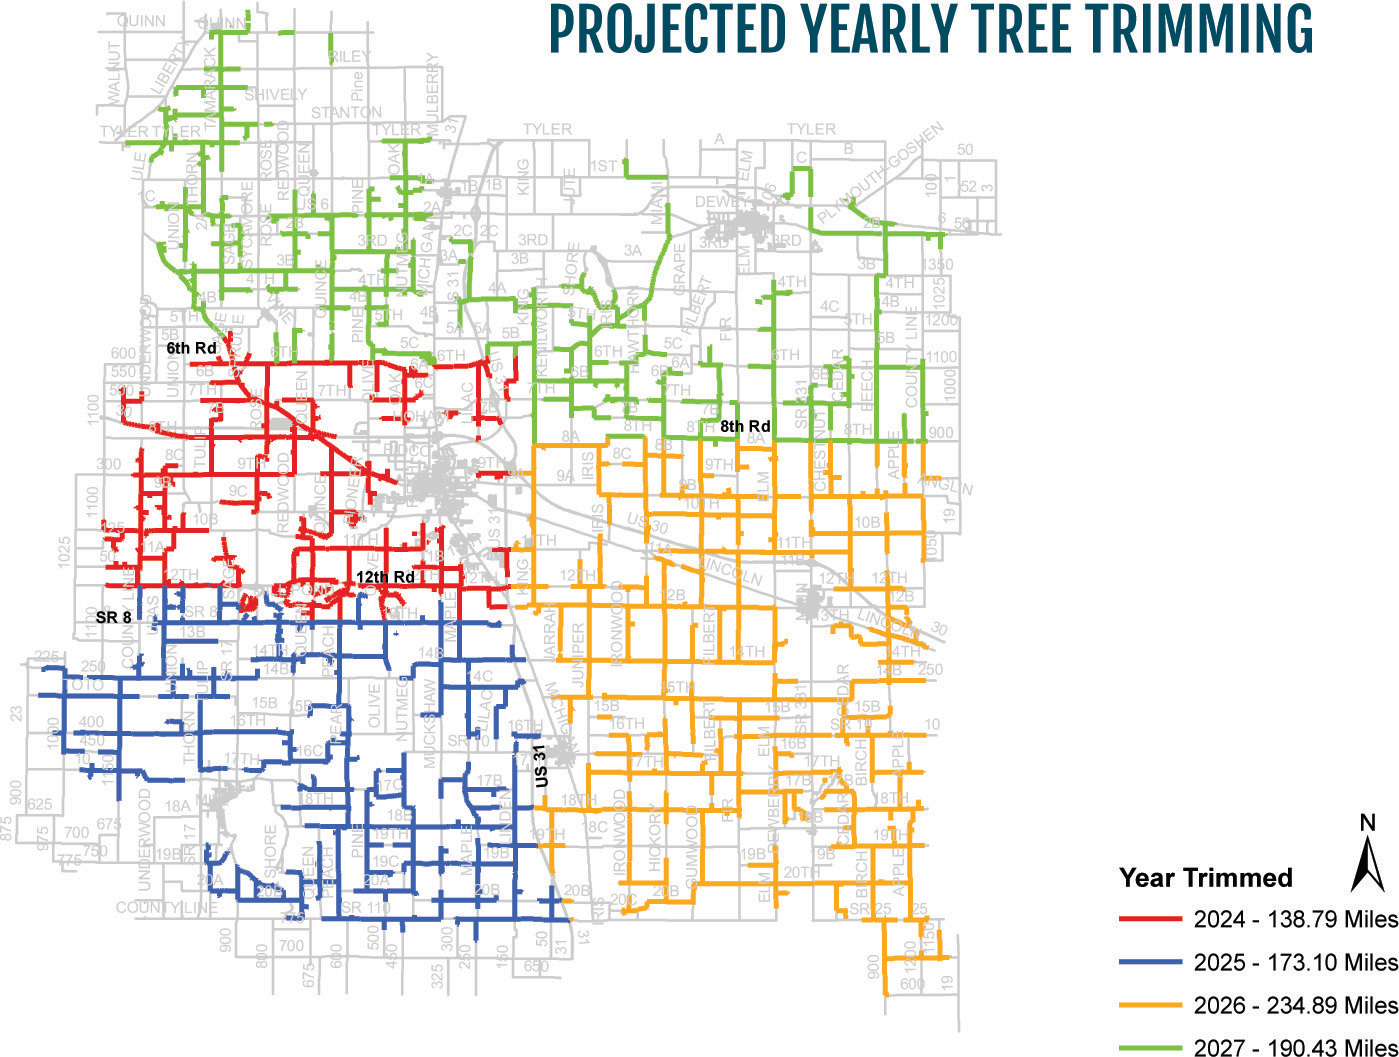 Projected Yearly Tree Trimming